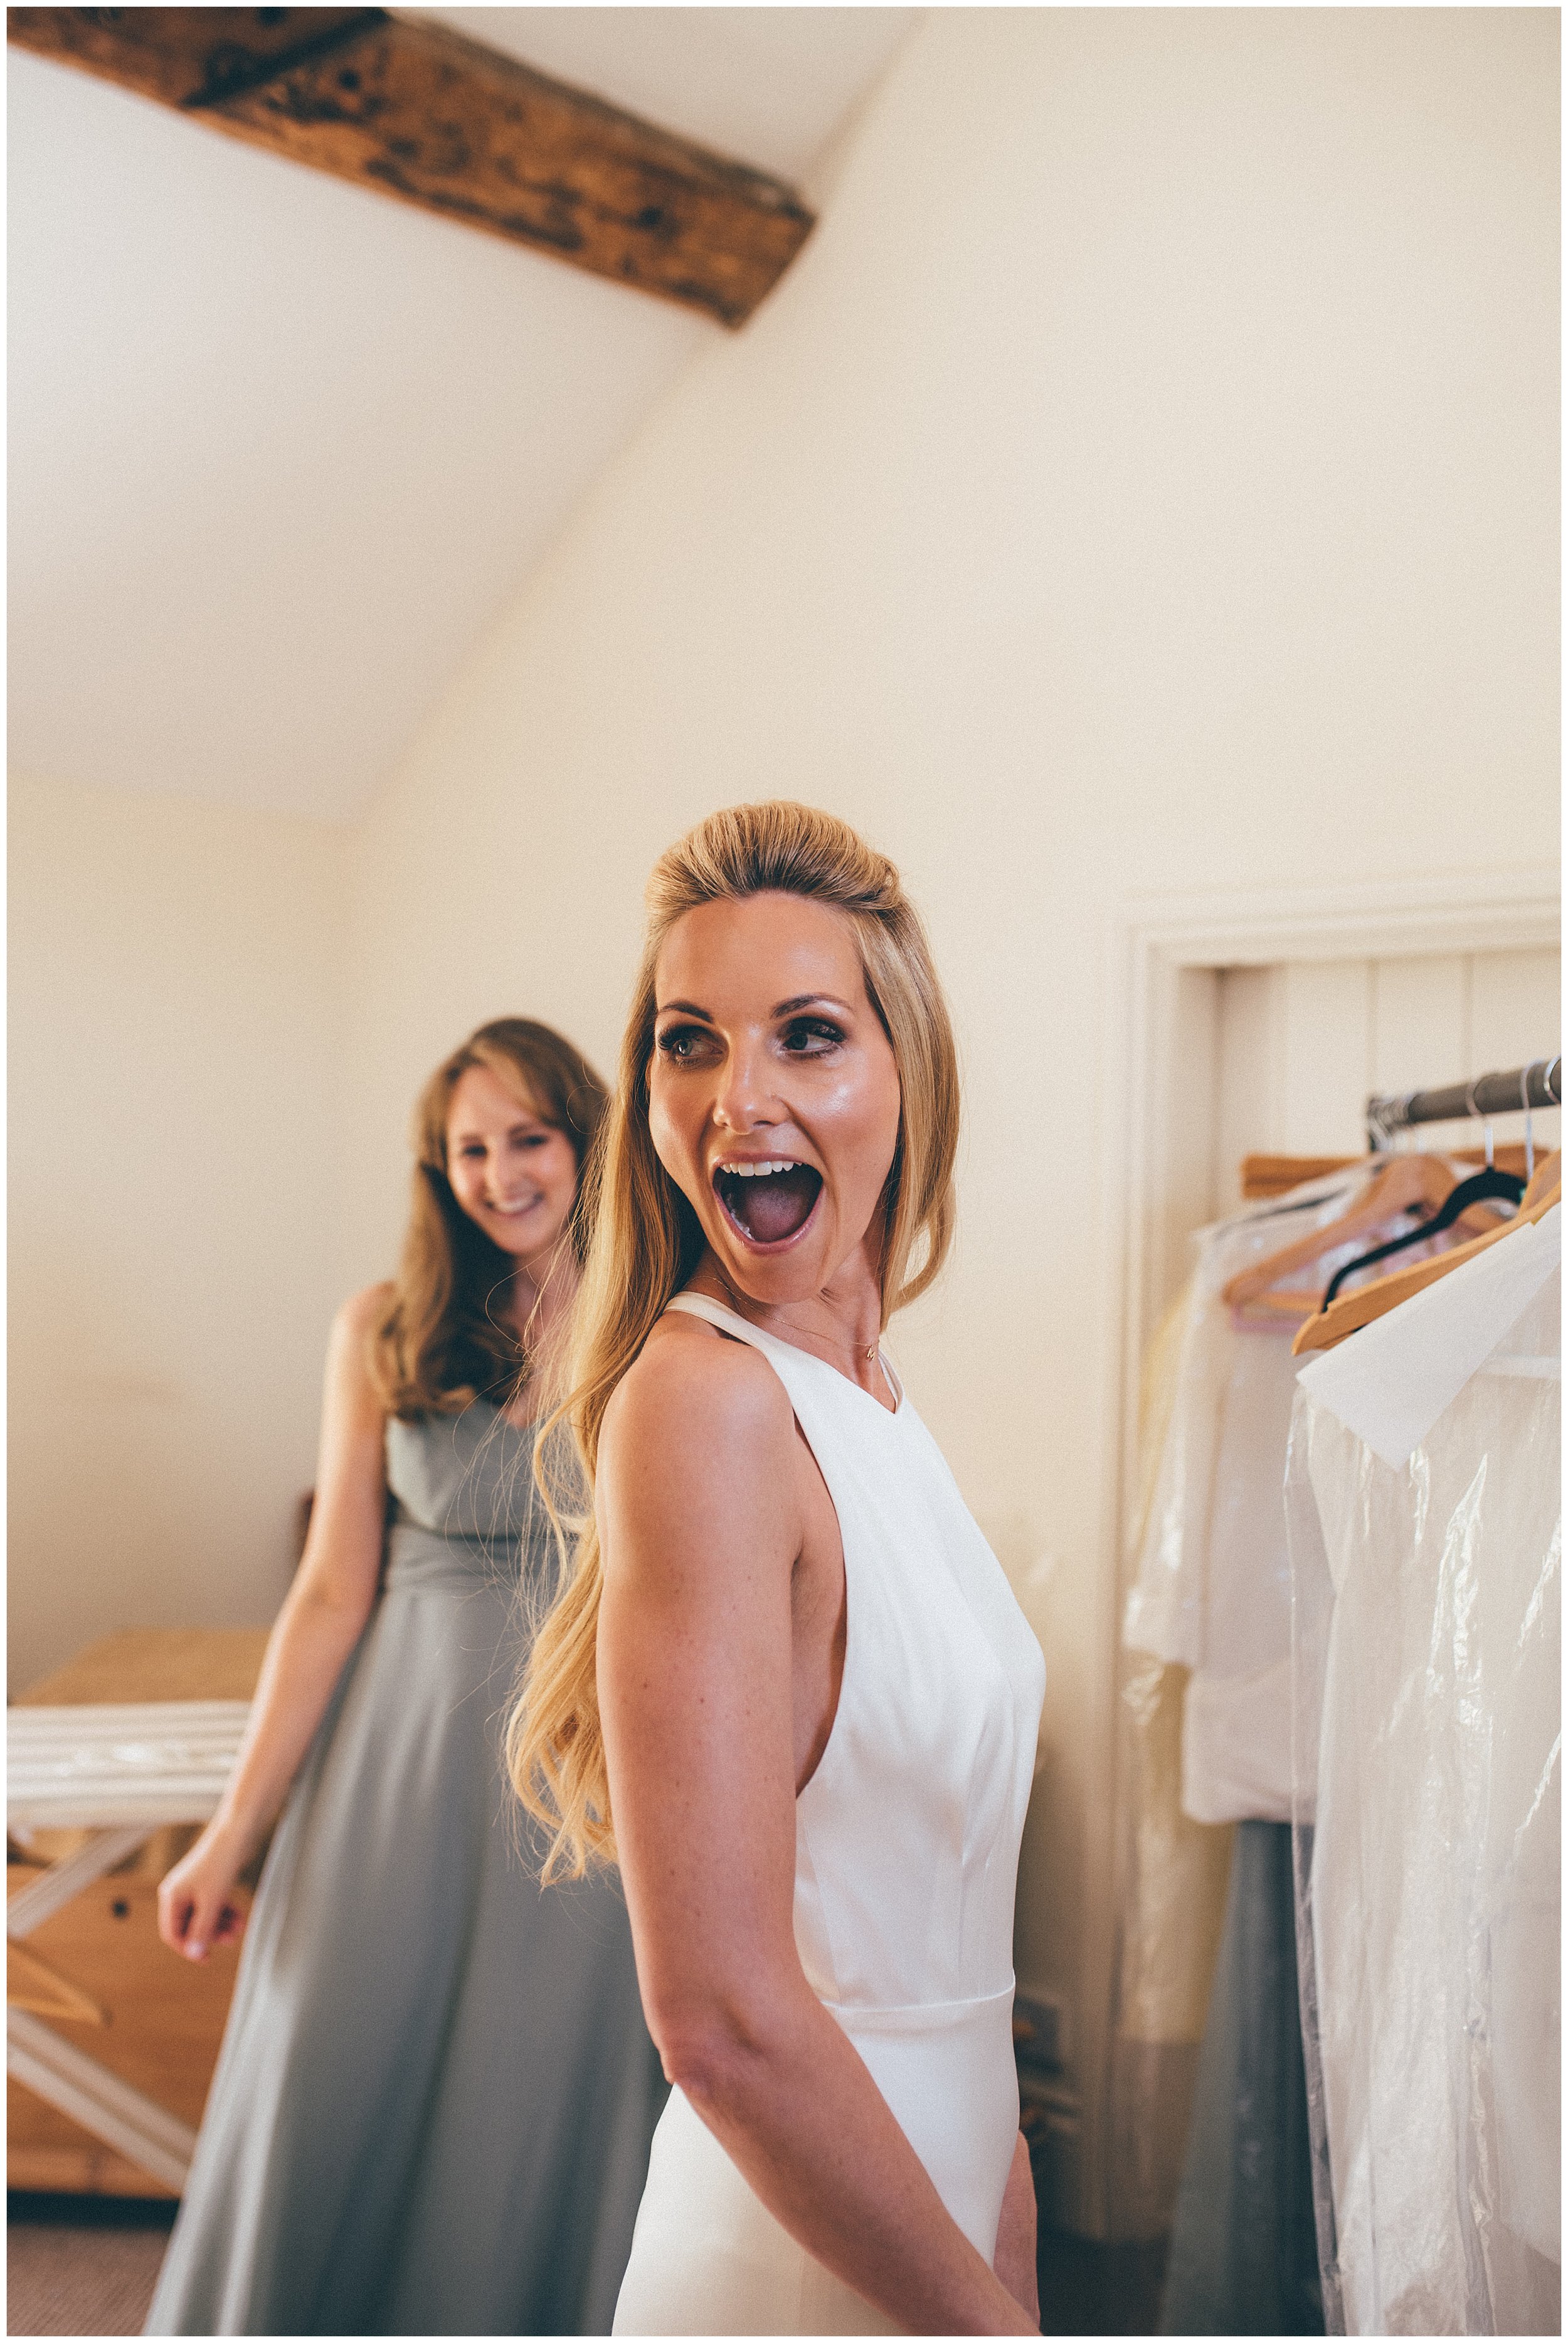 Bride is very excited seeing her reflection for the first time in Cheshire